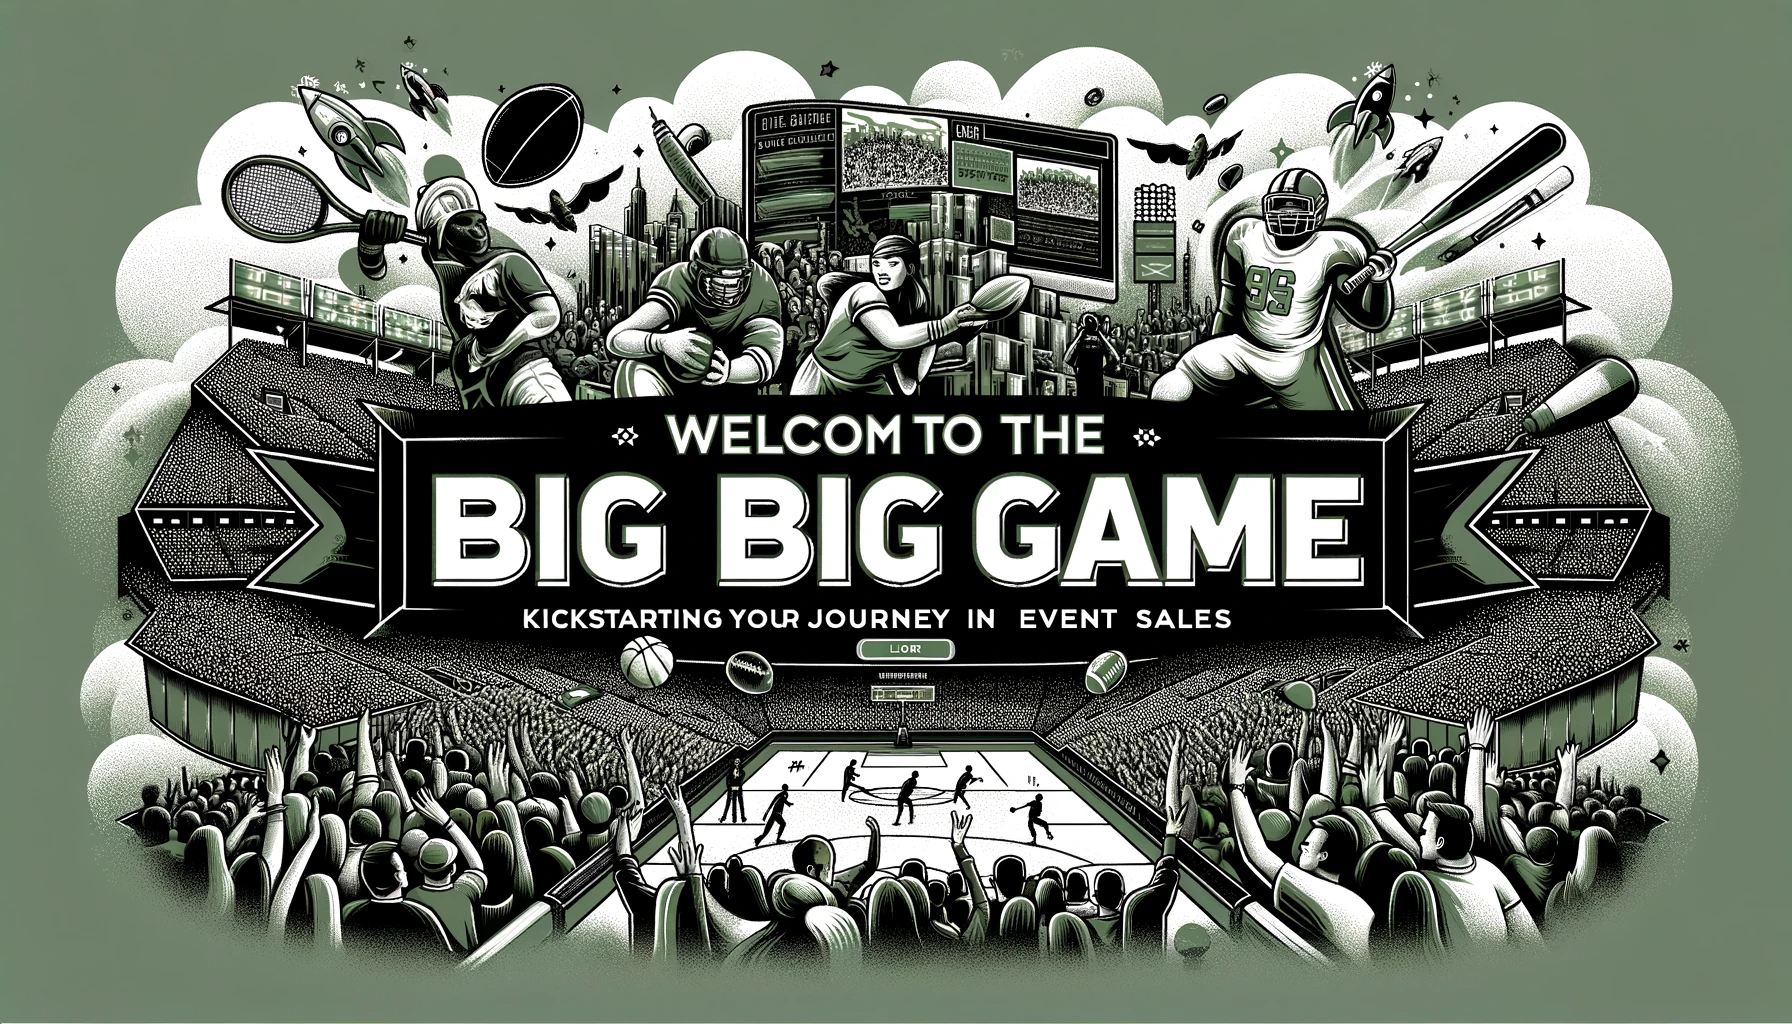 Welcome to the Big Game: Kickstarting Your Journey in Event Sales